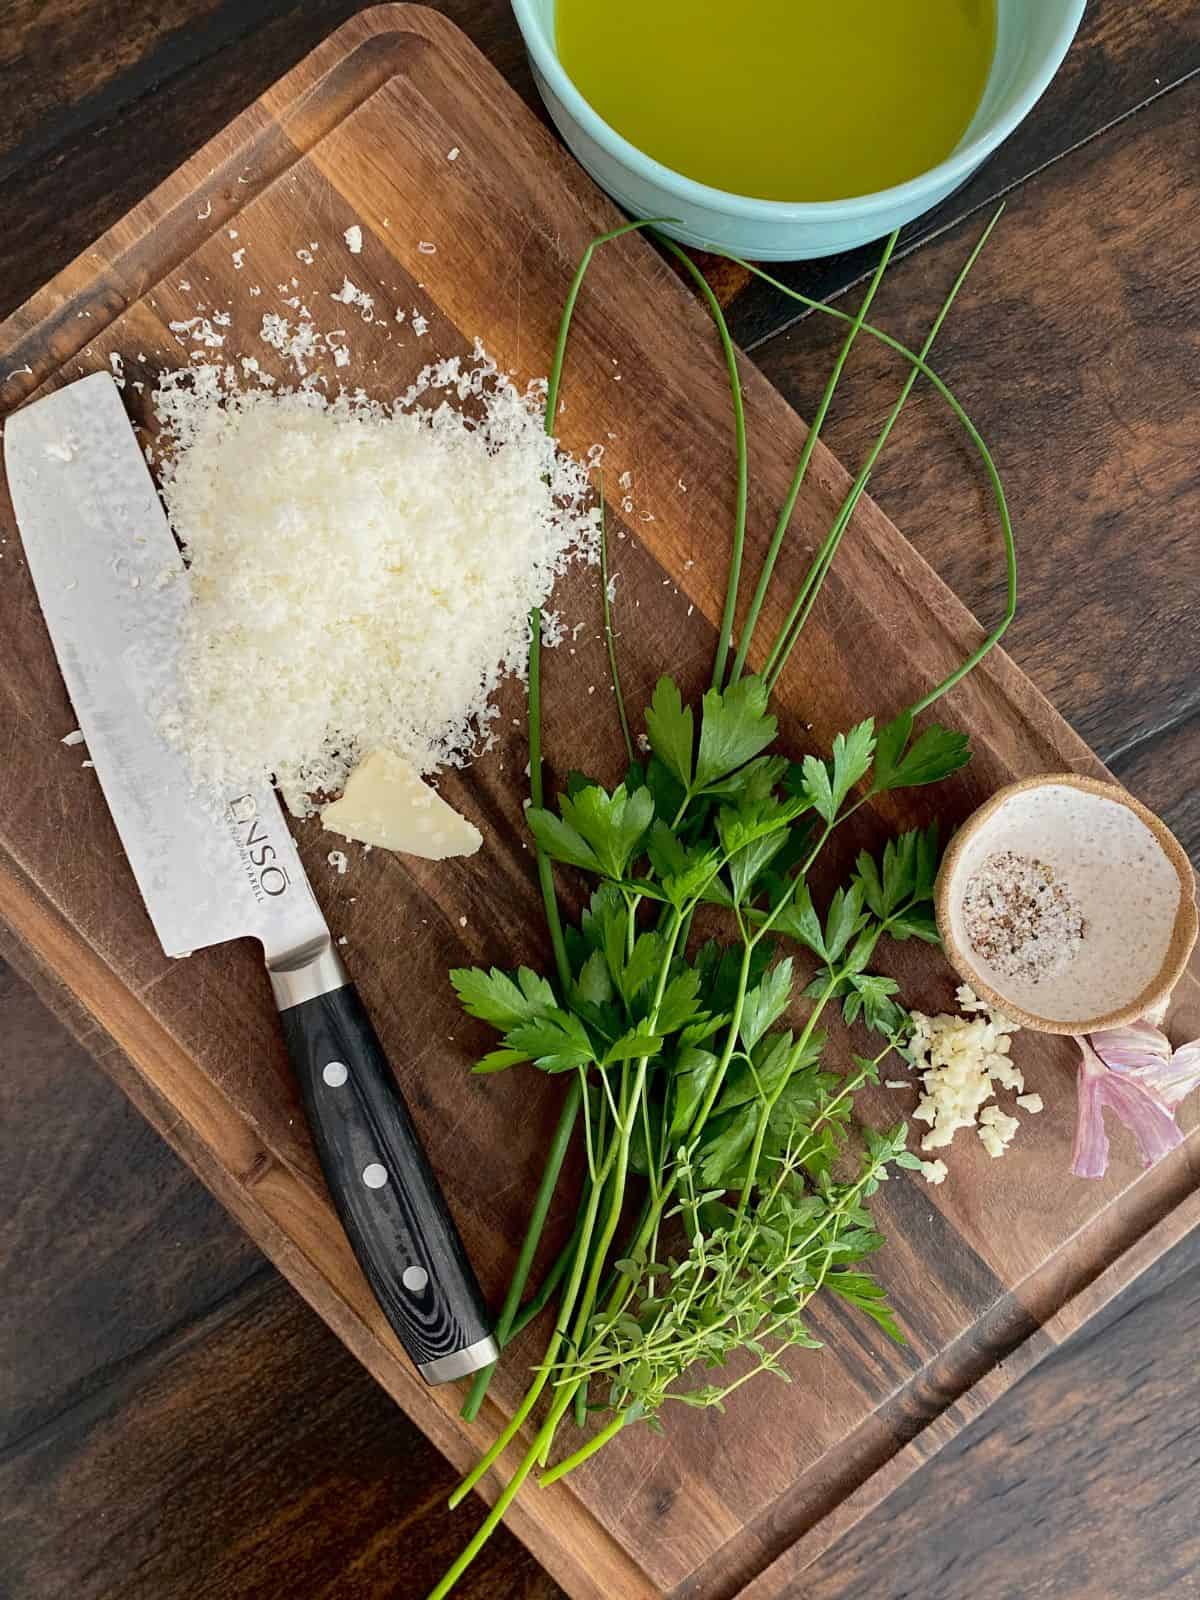 bowl of olive oil on wood board next to knife, grated parmesan and fresh herbs